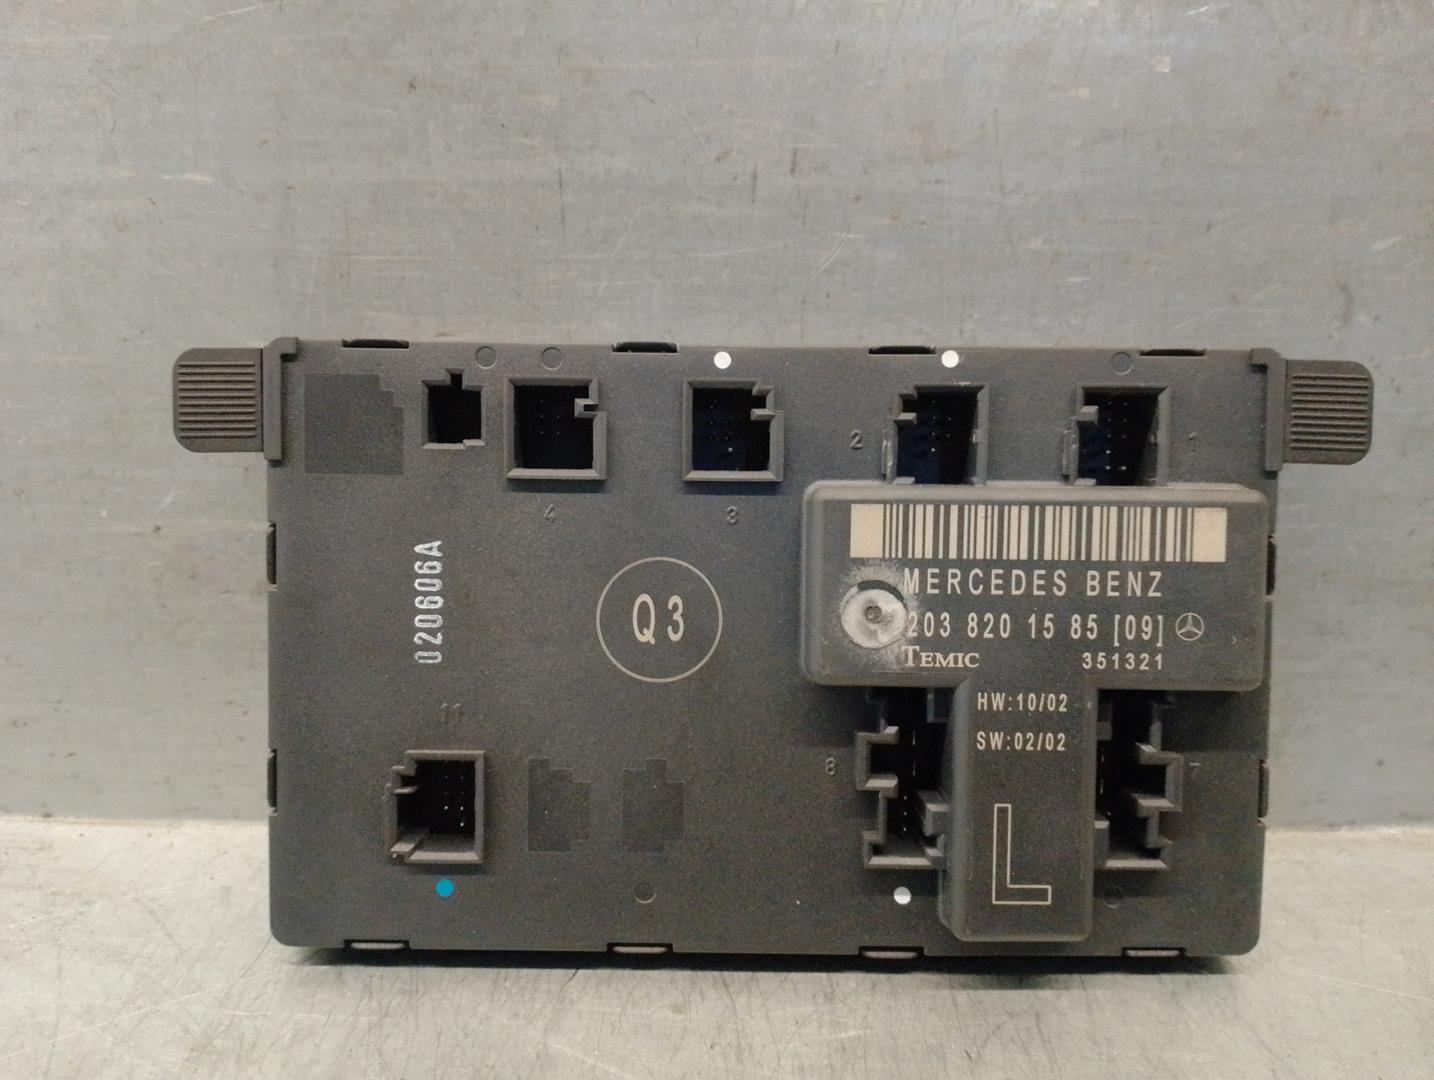 MERCEDES-BENZ C-Class W203/S203/CL203 (2000-2008) Other Control Units 2038201585, 351321, TEMIC 24473587